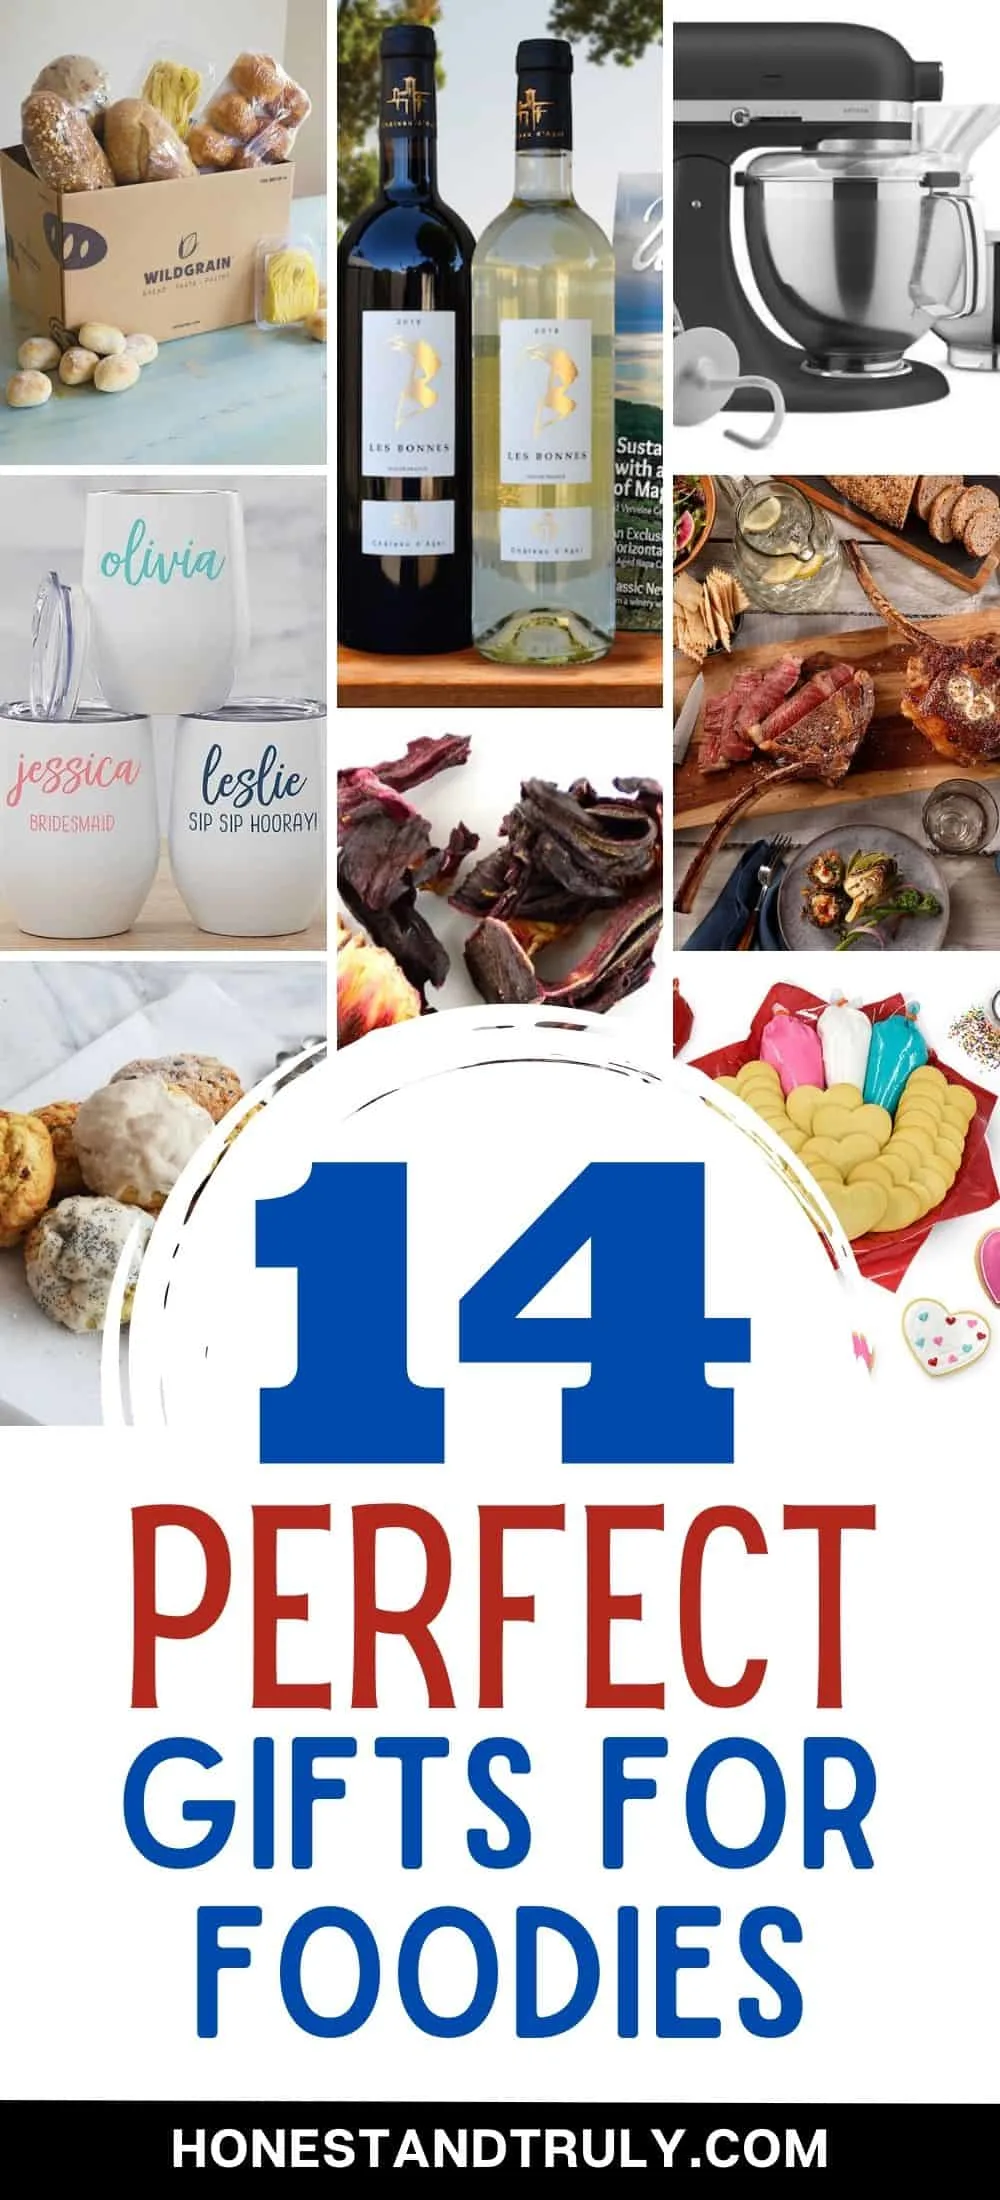 Collage of gifts from mugs to steak to cookies to wine bottles with text 14 perfect gifts for foodies.